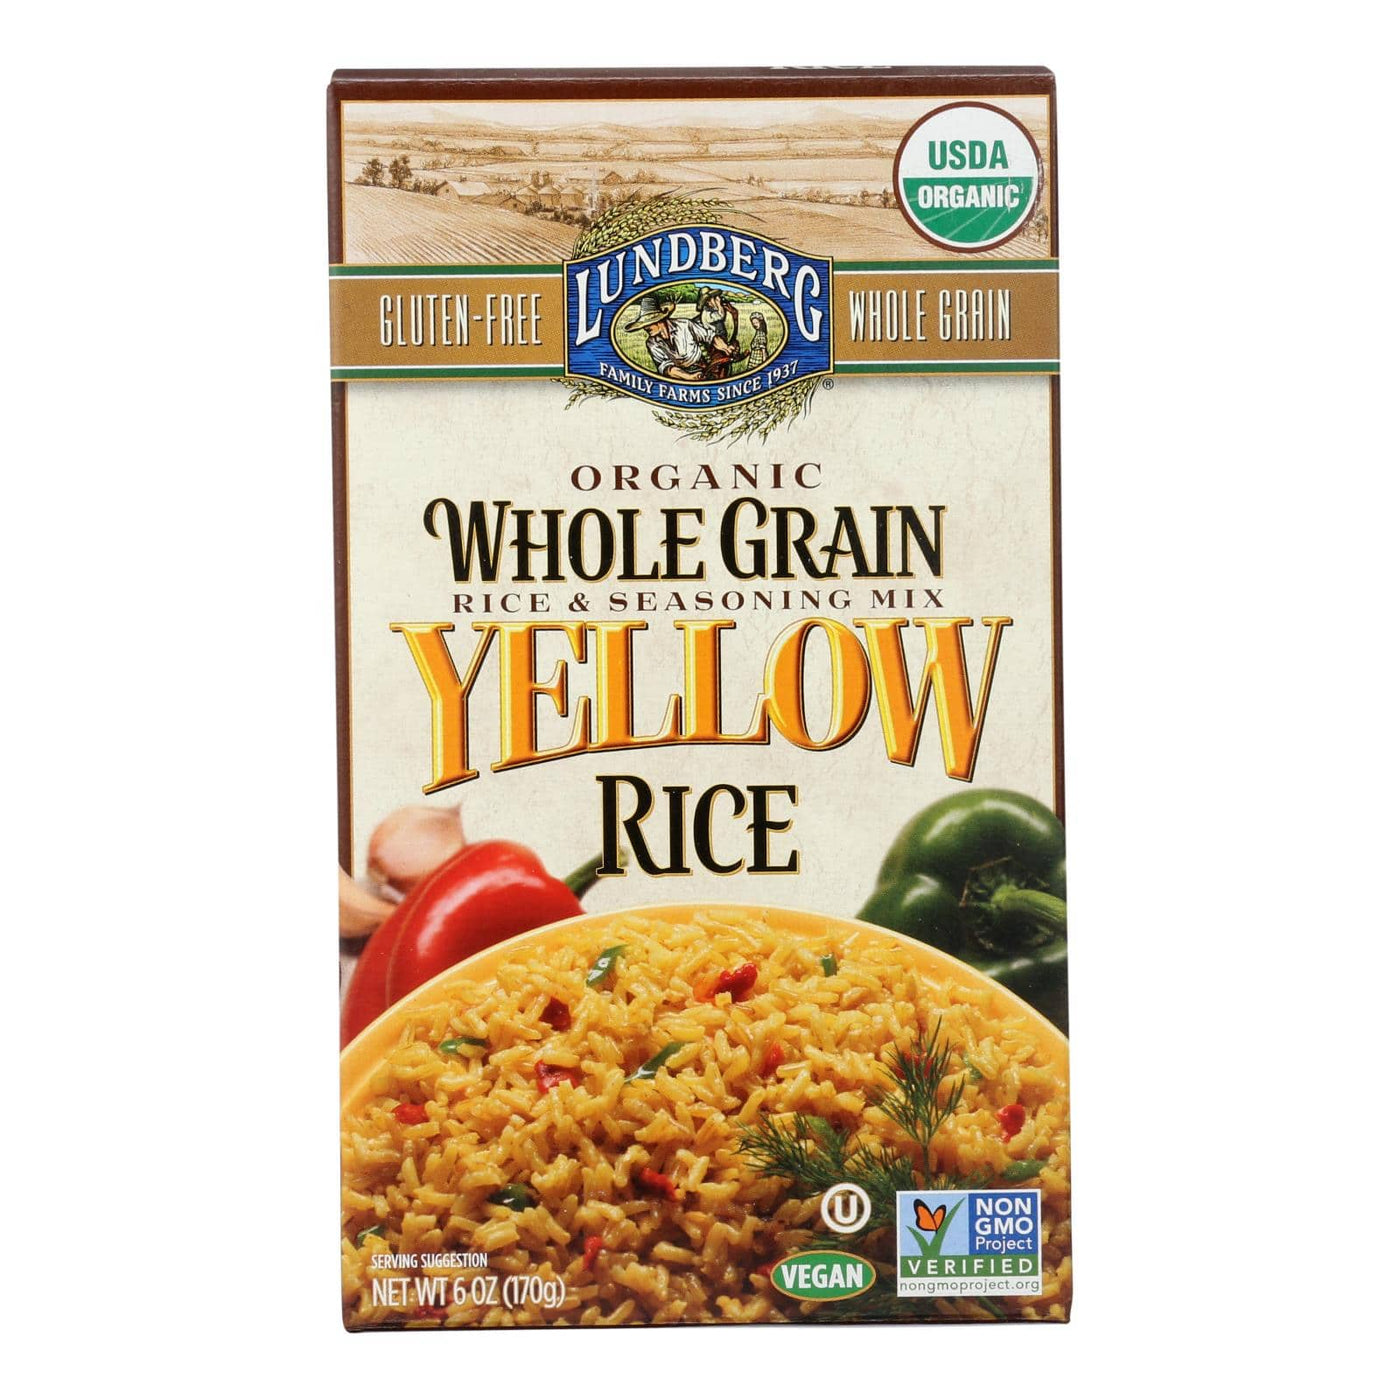 Buy Lundberg Family Farms Organic Whole Grain Yellow Rice - Case Of 6 - 6 Oz.  at OnlyNaturals.us